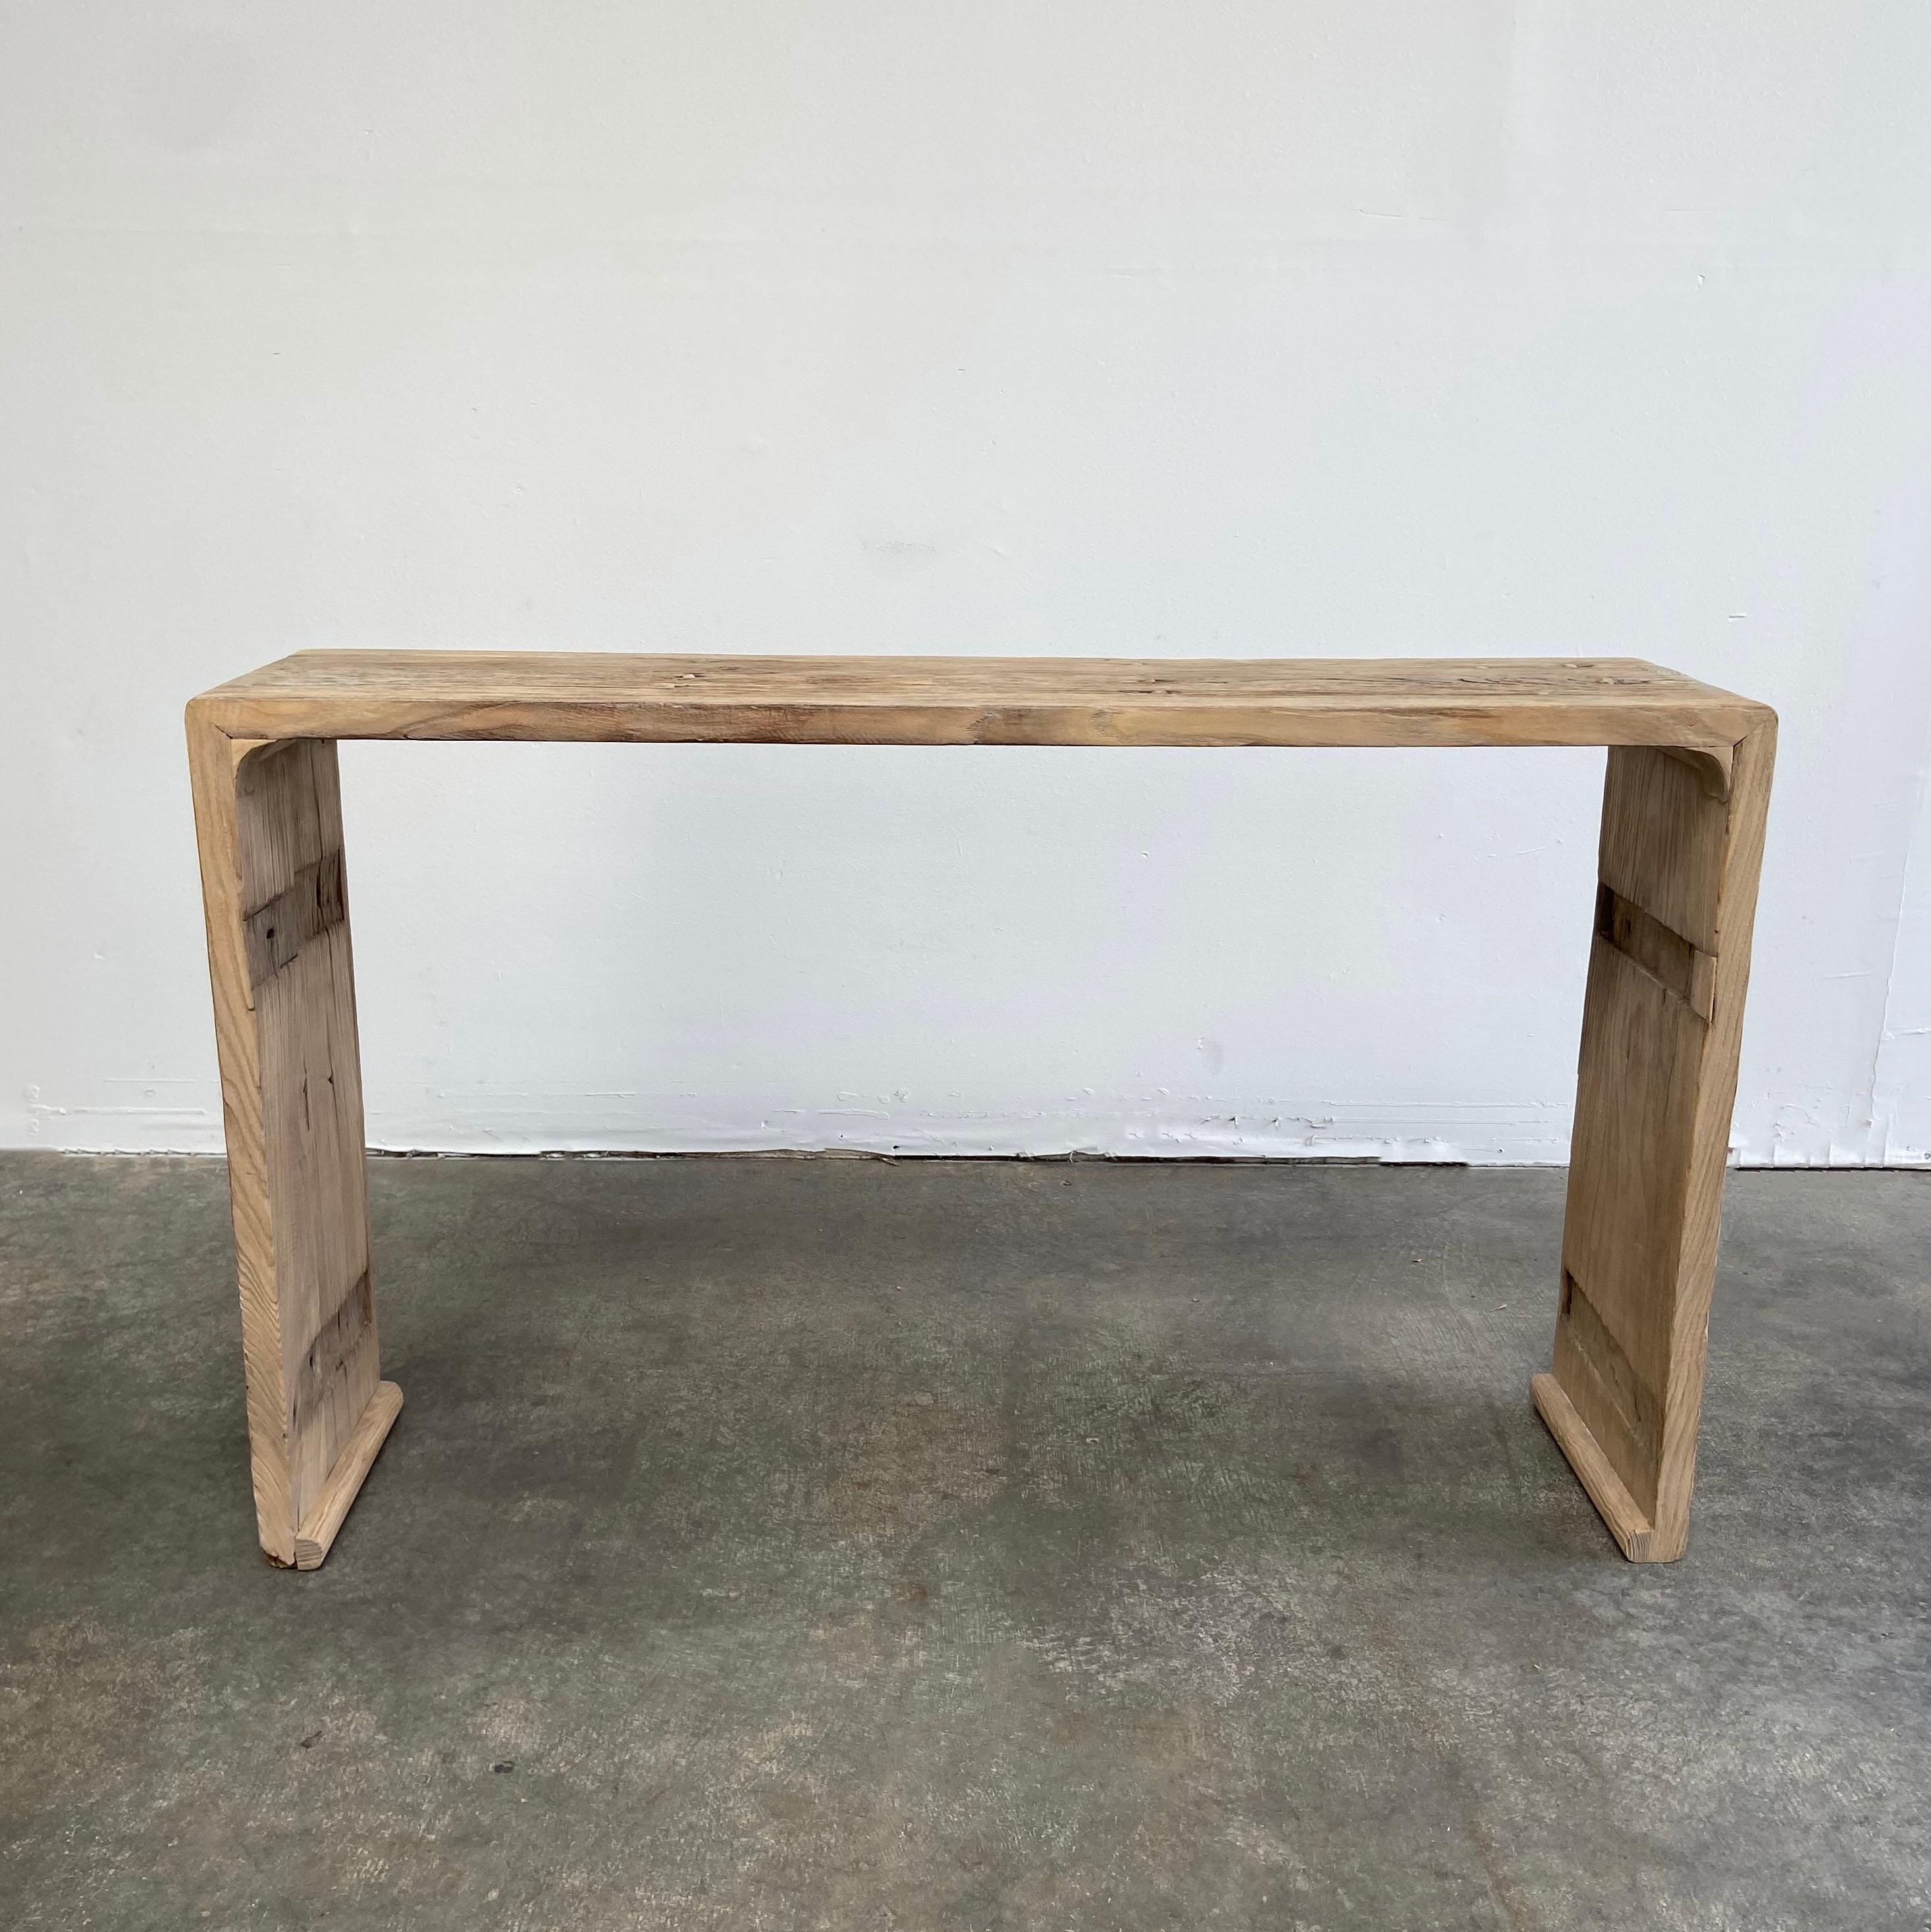 Vintage antique reclaimed elm wood console table
Made from vintage reclaimed elm wood. Beautiful antique patina, with weathering and age, these are solid and sturdy ready for daily use, use as a entry table, sofa table or console in a dining room.